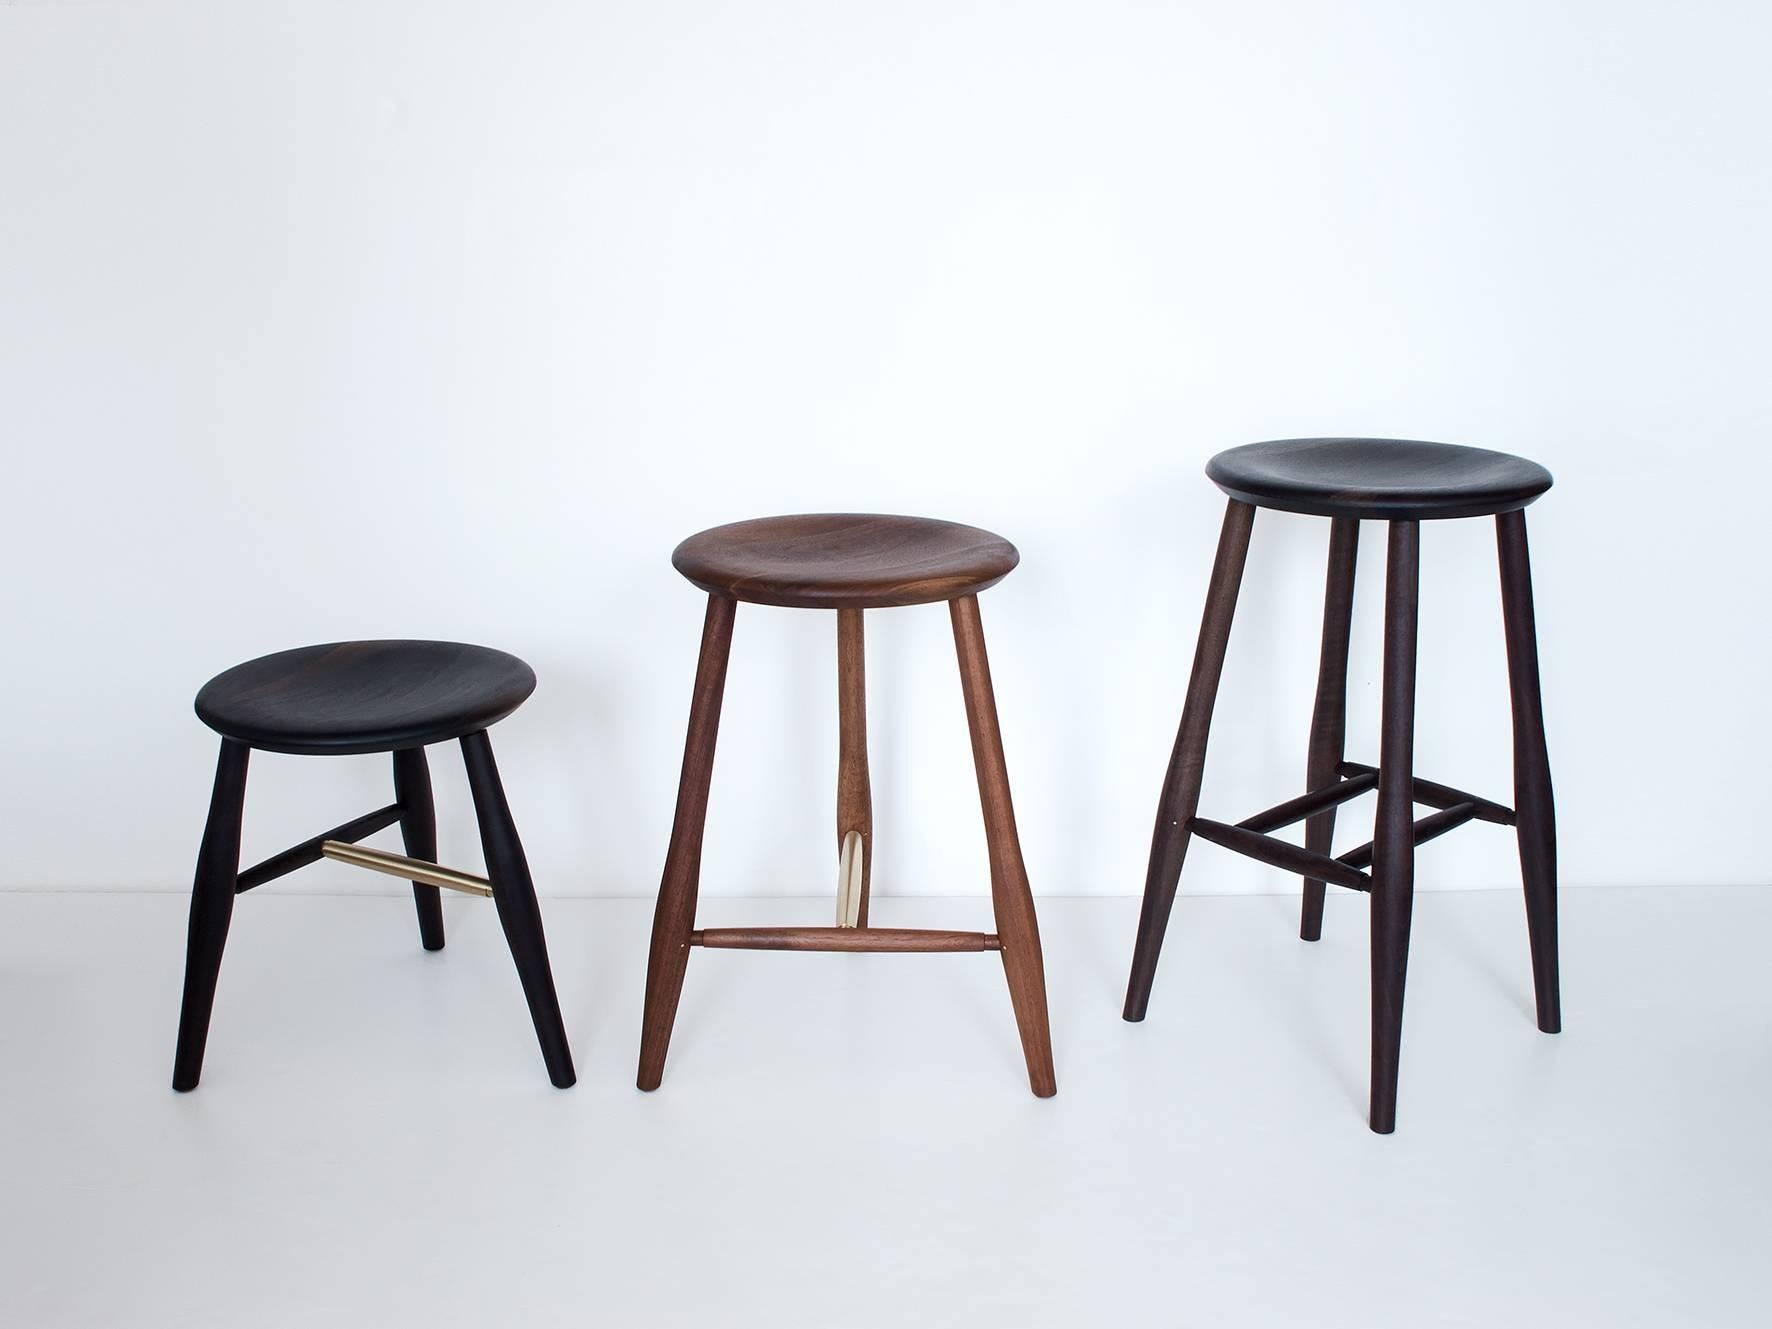 The Swell stool is a turned and carved bar-height four-legged stool with a comfortable 16 inch diameter seat. It features brass-pinned mortise and tenon joinery. Available in black walnut (natural, oxidized or ebonized), maple (natural, bleached or